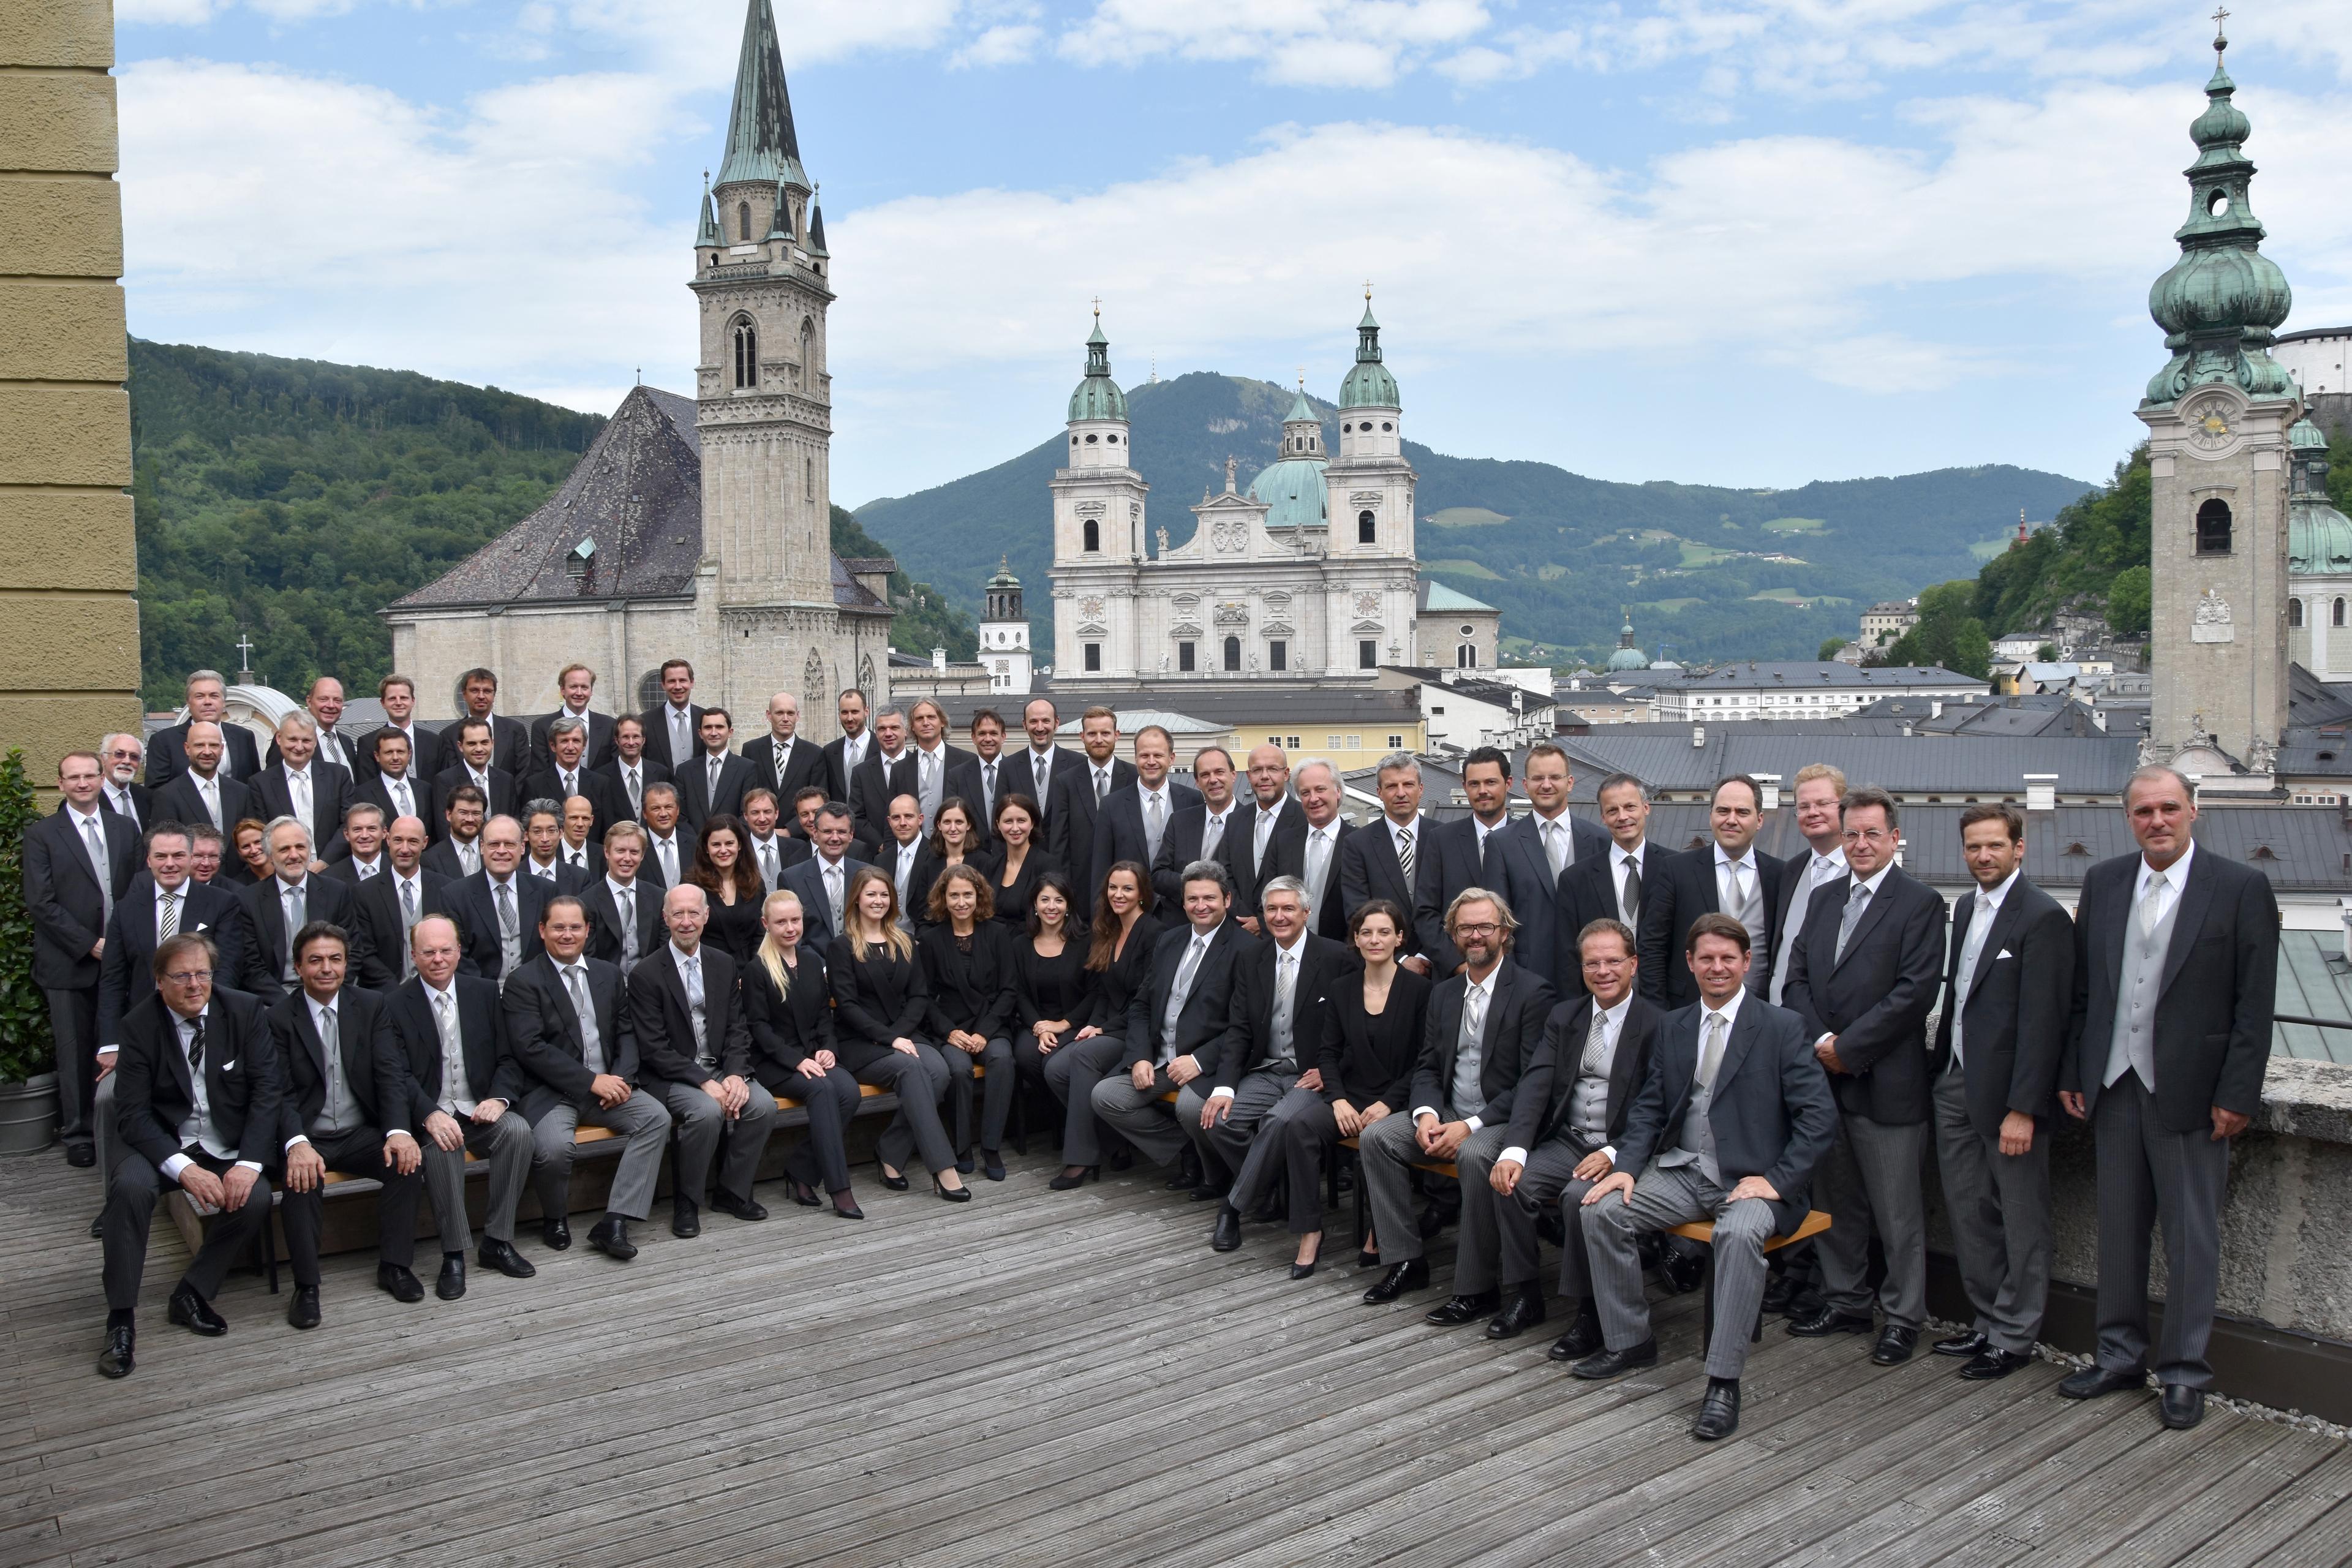 Musicians of the Wiener Philharmoniker gathered outdoors in Salzburg